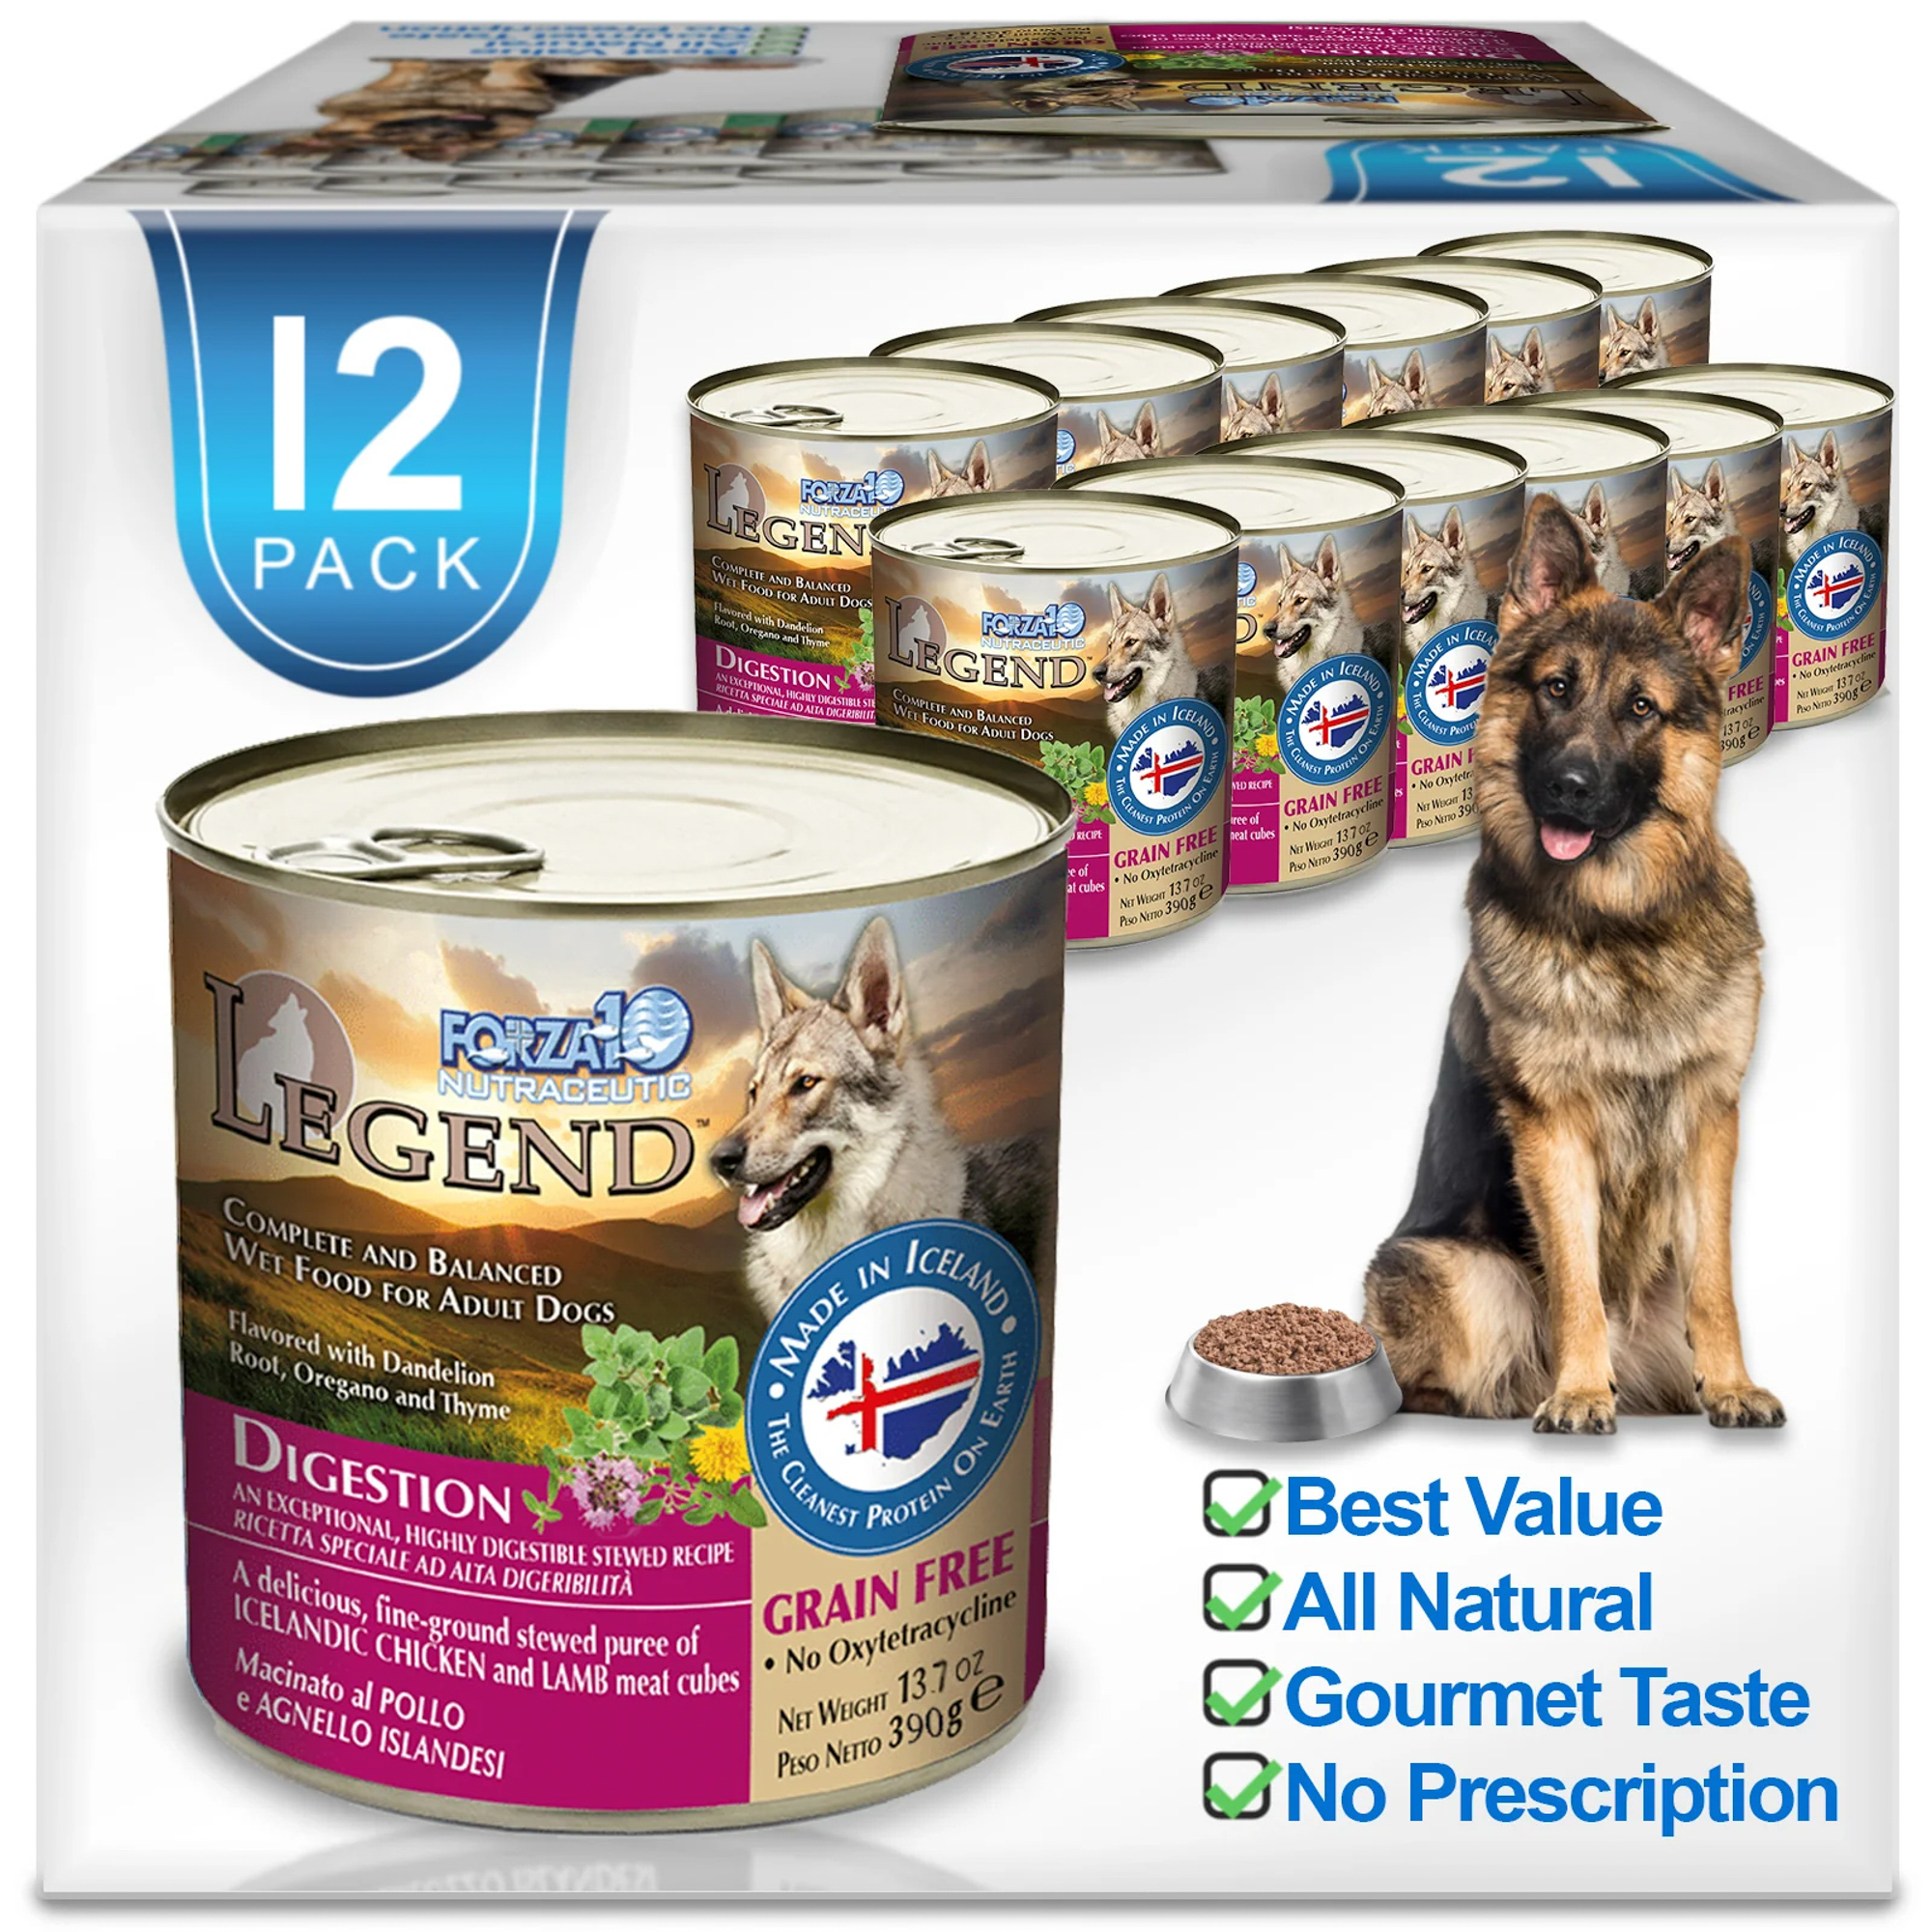 Forza10 Nutraceutic Legend Digestion Icelandic Chicken & Lamb Recipe Grain-Free Canned Dog Food Usage